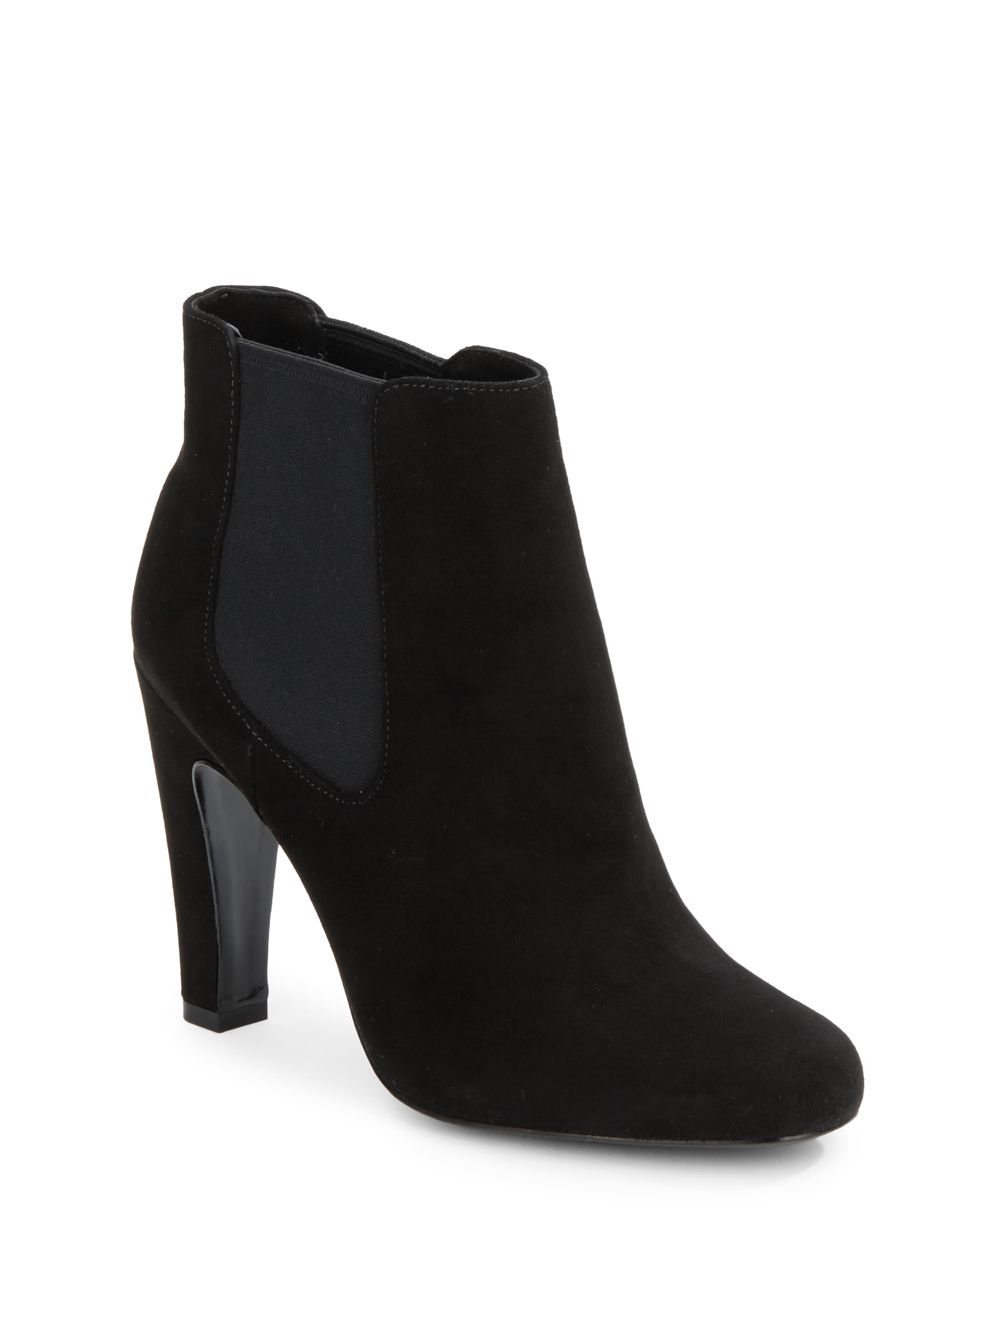 Lyst - Vince Camuto Signature Galahad Suede Ankle Boots in Black